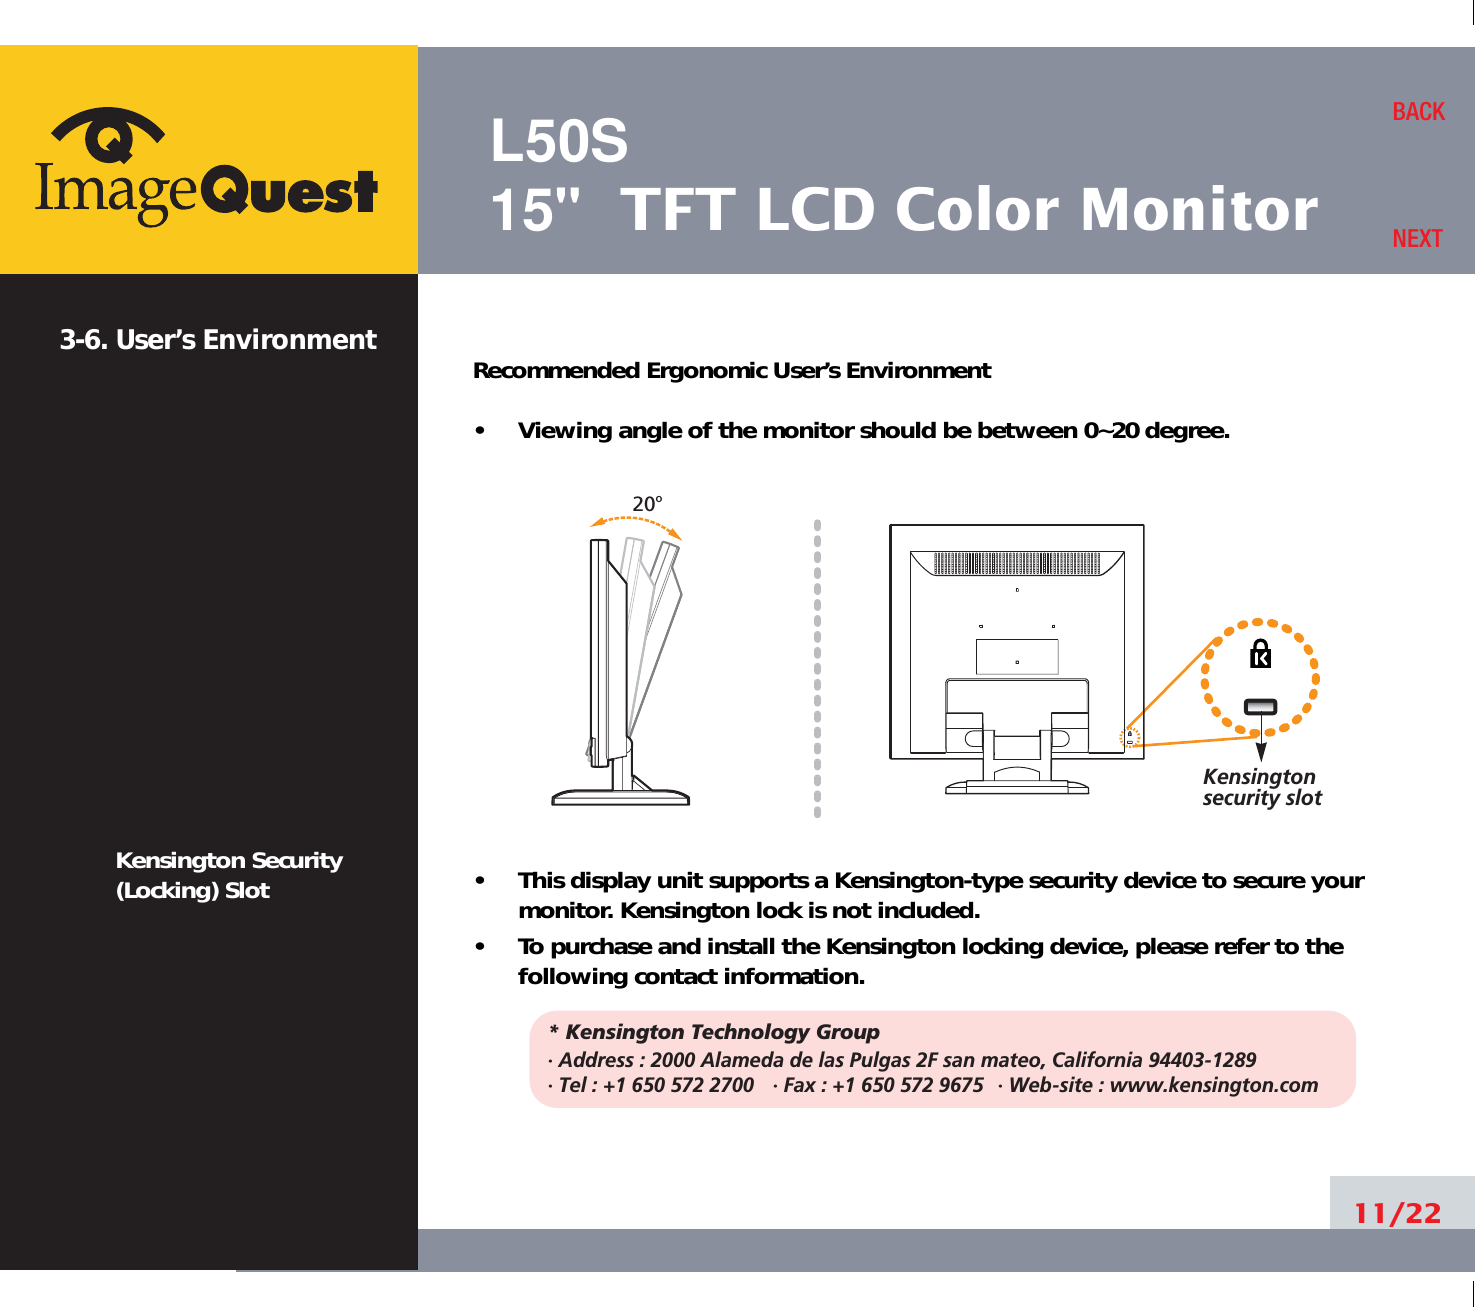 L50S15&quot; TFT LCD Color Monitor3-6. User’s EnvironmentKensington Security(Locking) SlotRecommended Ergonomic User’s Environment•     Viewing angle of the monitor should be between 0~20 degree.•     This display unit supports a Kensington-type security device to secure yourmonitor. Kensington lock is not included.•     To purchase and install the Kensington locking device, please refer to thefollowing contact information.* Kensington Technology Group· Address : 2000 Alameda de las Pulgas 2F san mateo, California 94403-1289· Tel : +1 650 572 2700 · Fax : +1 650 572 9675 · Web-site : www.kensington.com11/22BACKNEXT20oKensington security slot